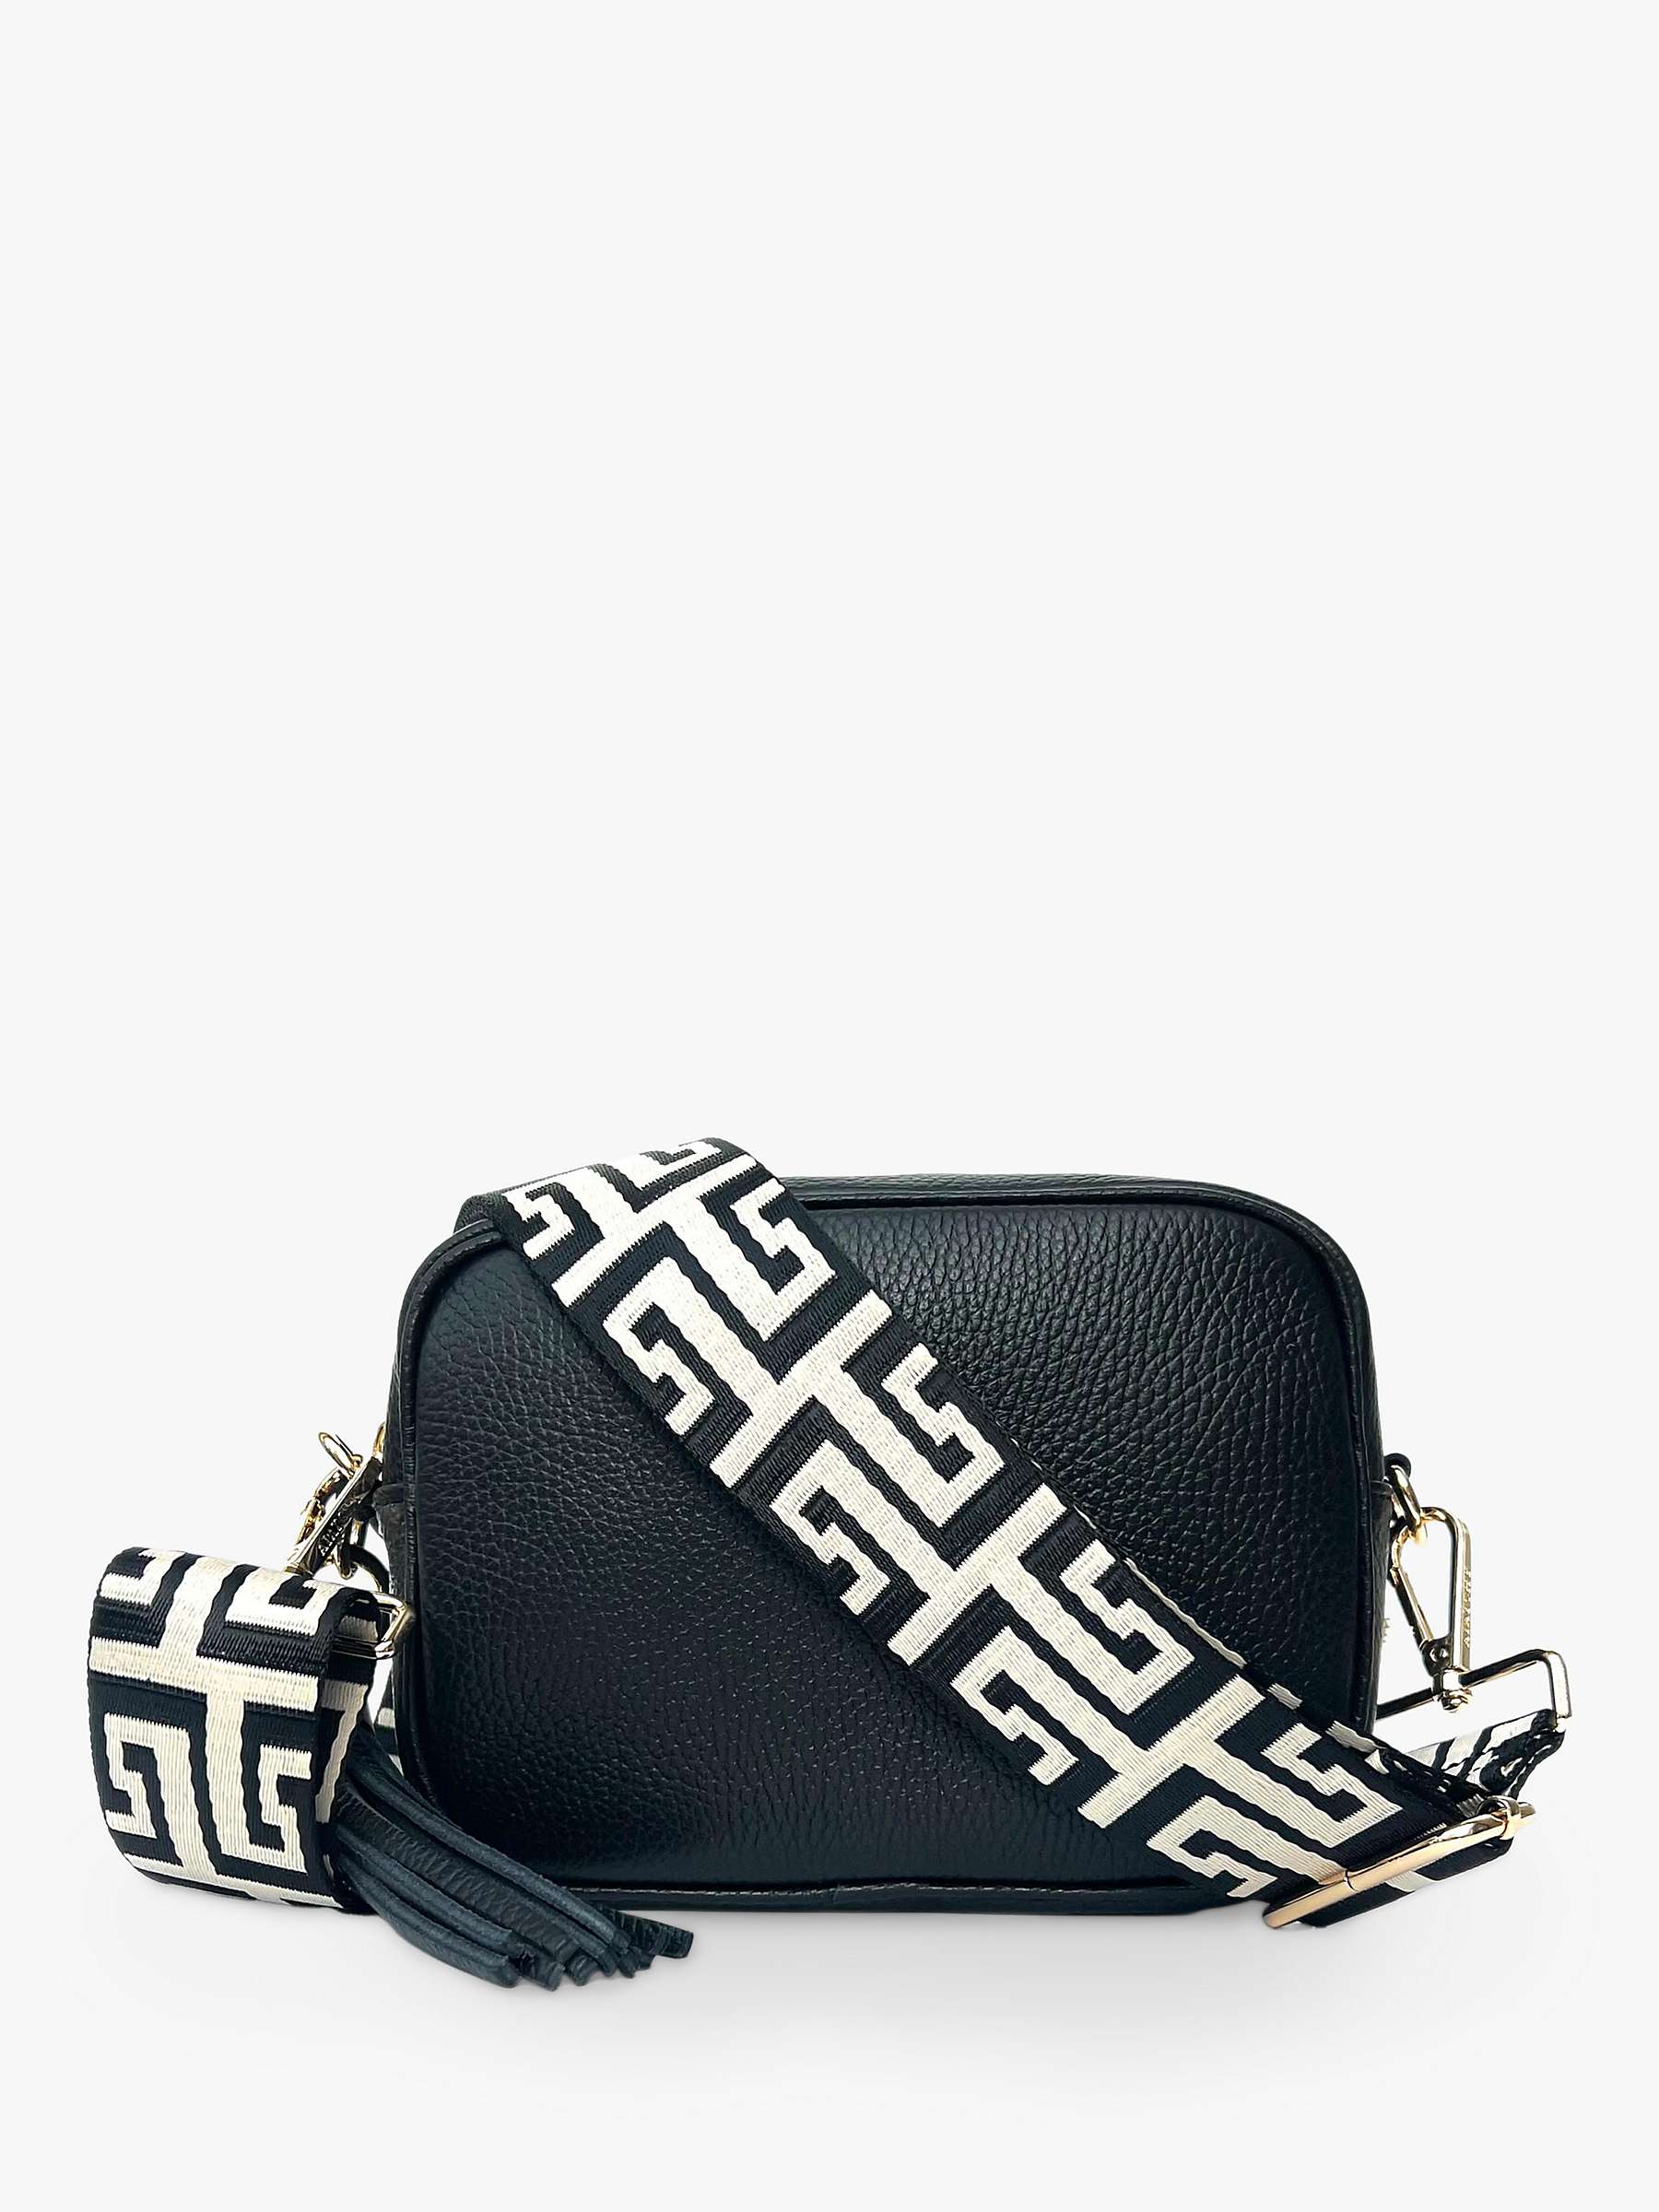 Buy Apatchy Maze Strap Leather Crossbody Bag Online at johnlewis.com